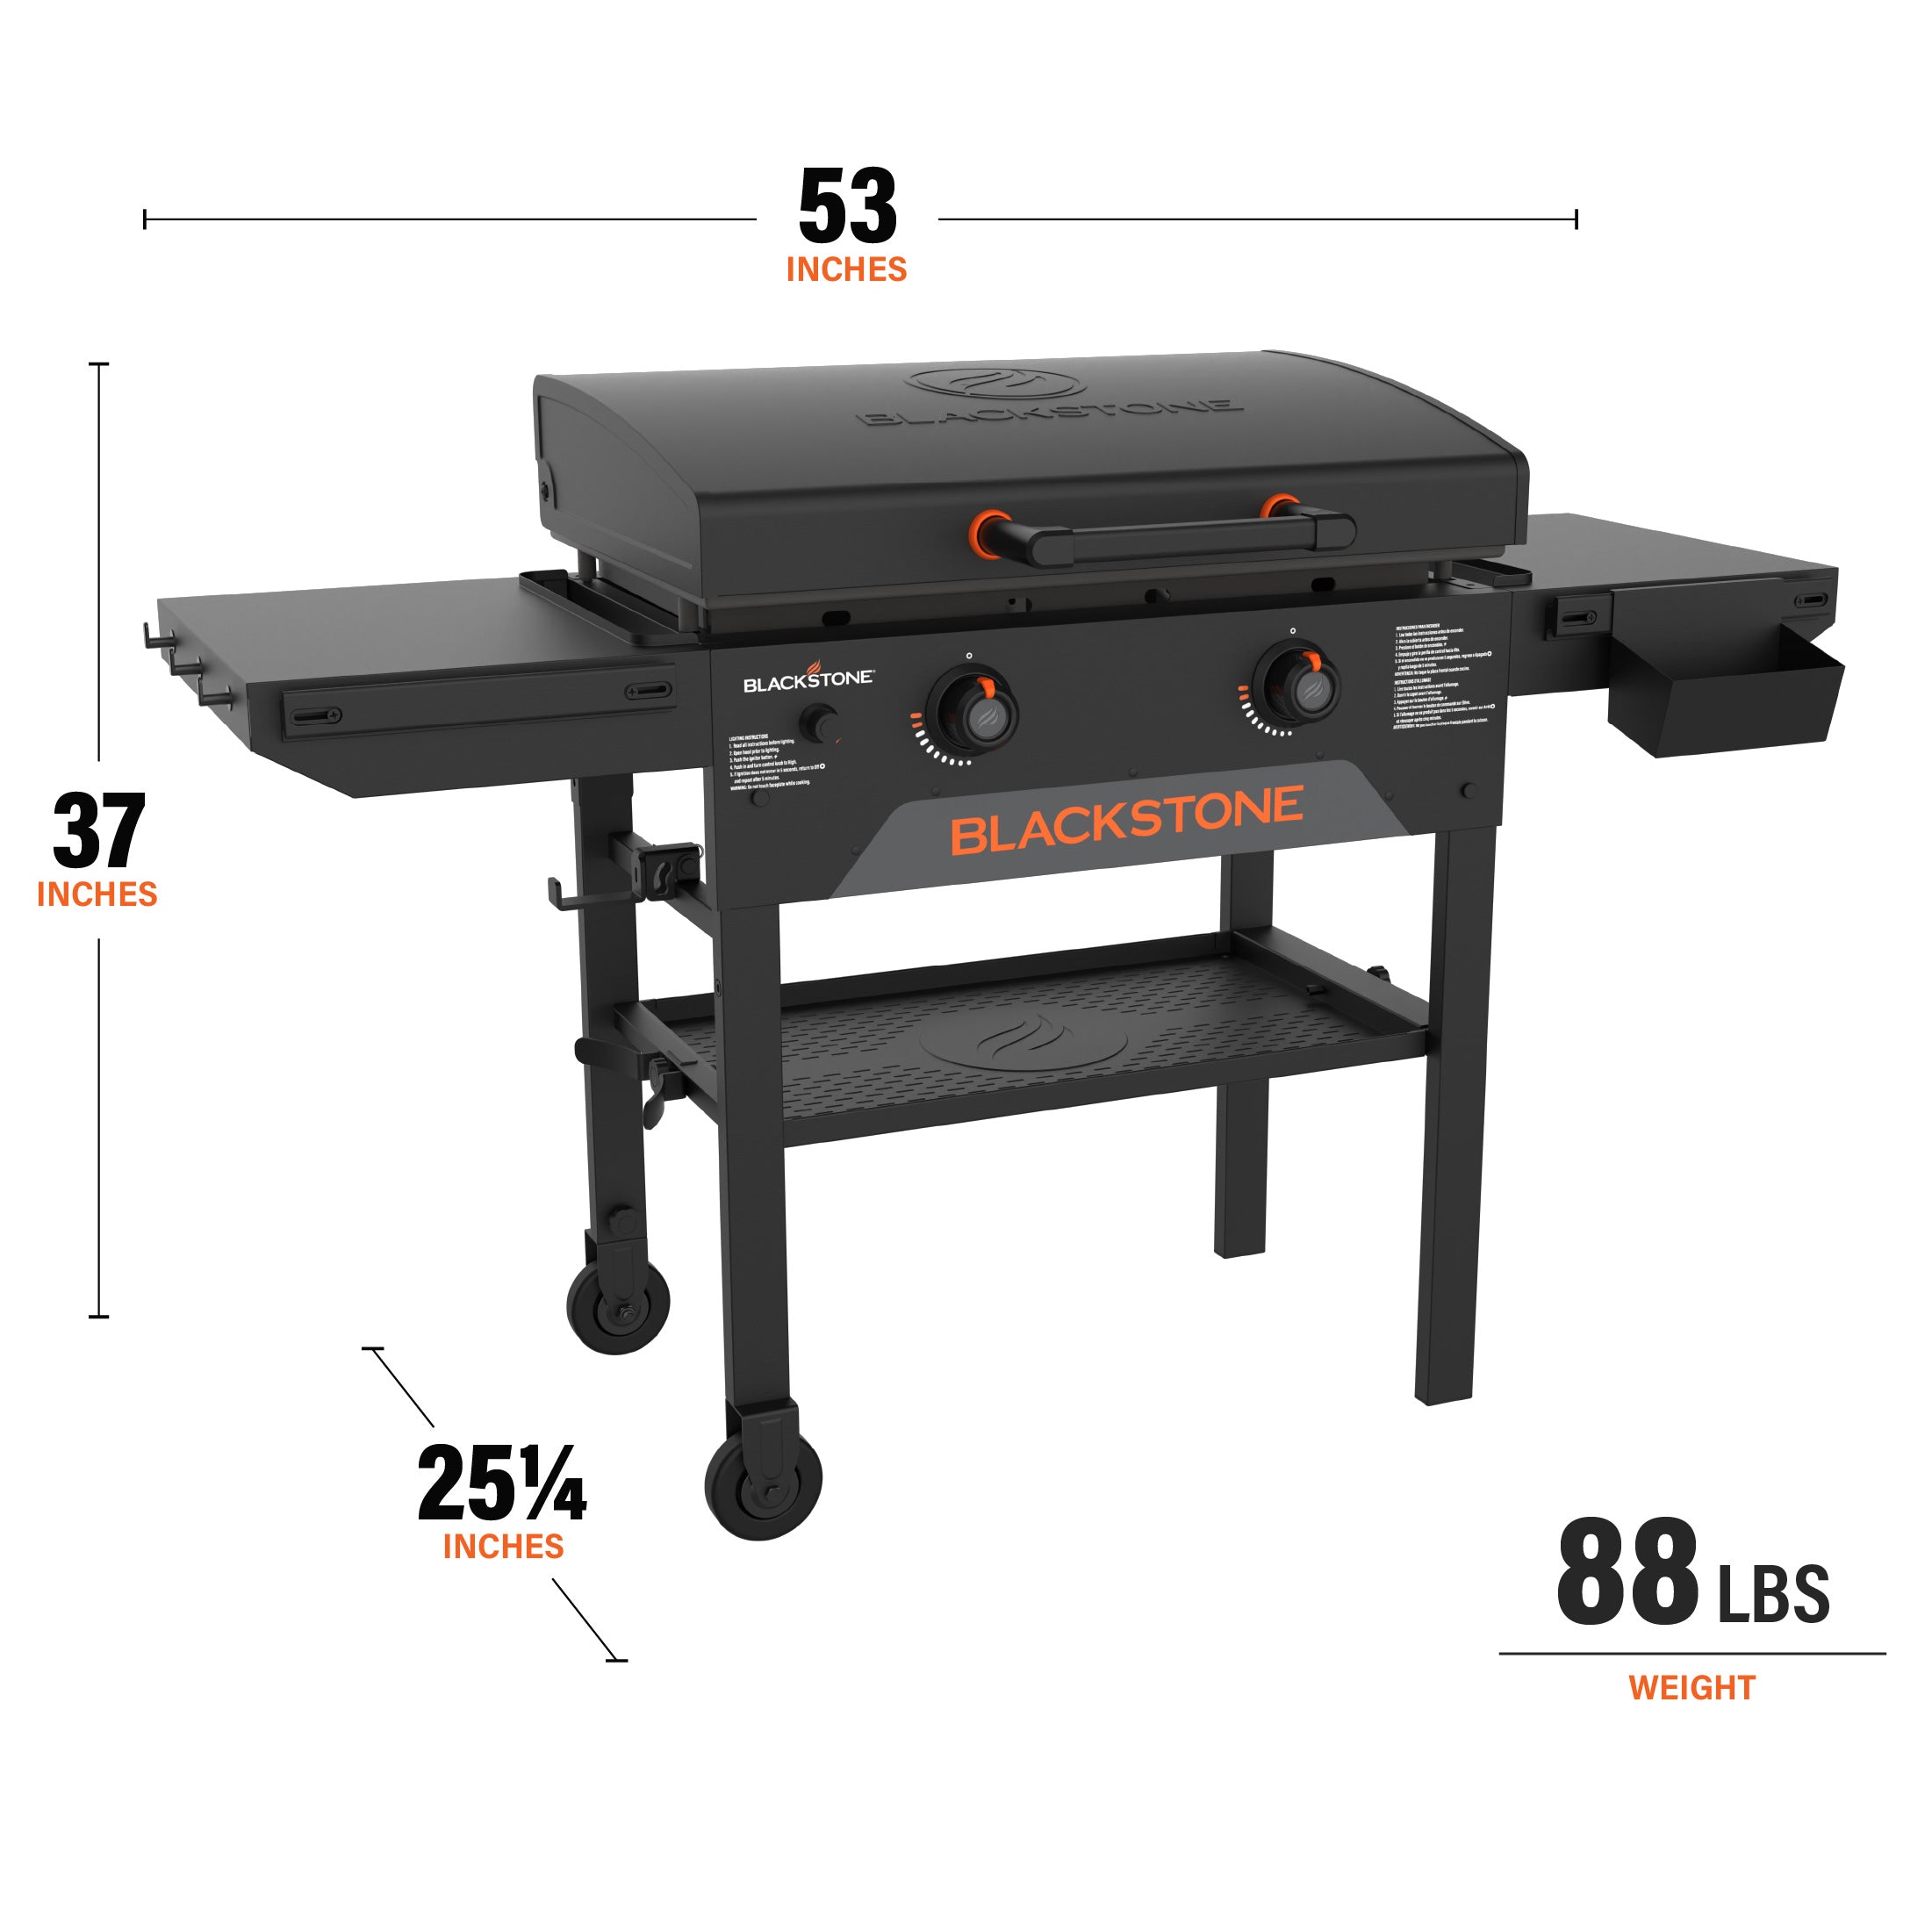 Blackstone 28" Omnivore Griddle With Hood Dimensions